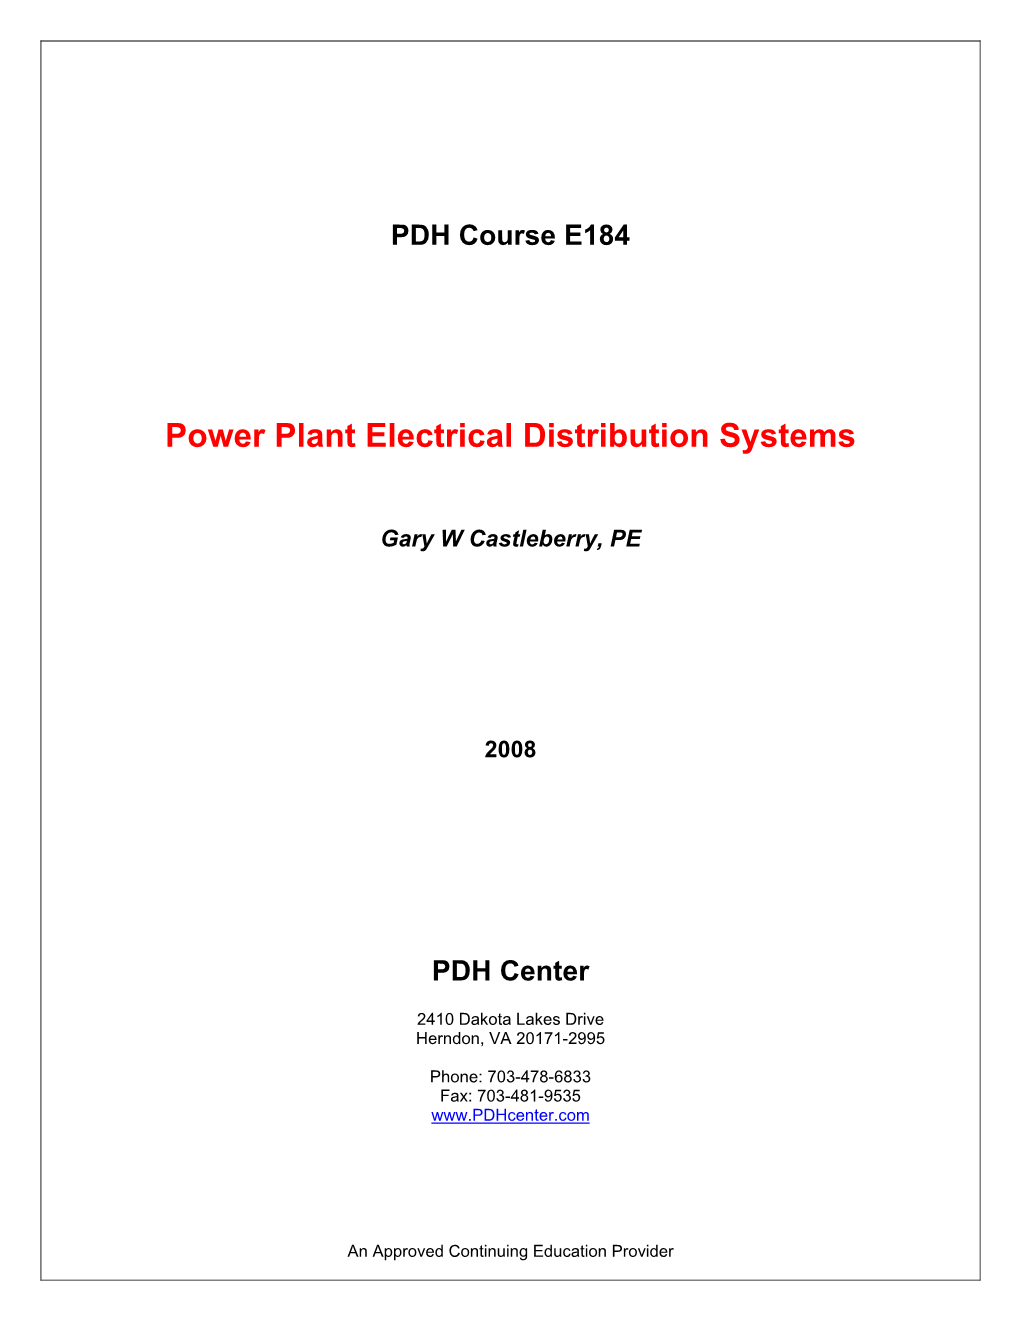 Power Plant Electrical Distribution Systems